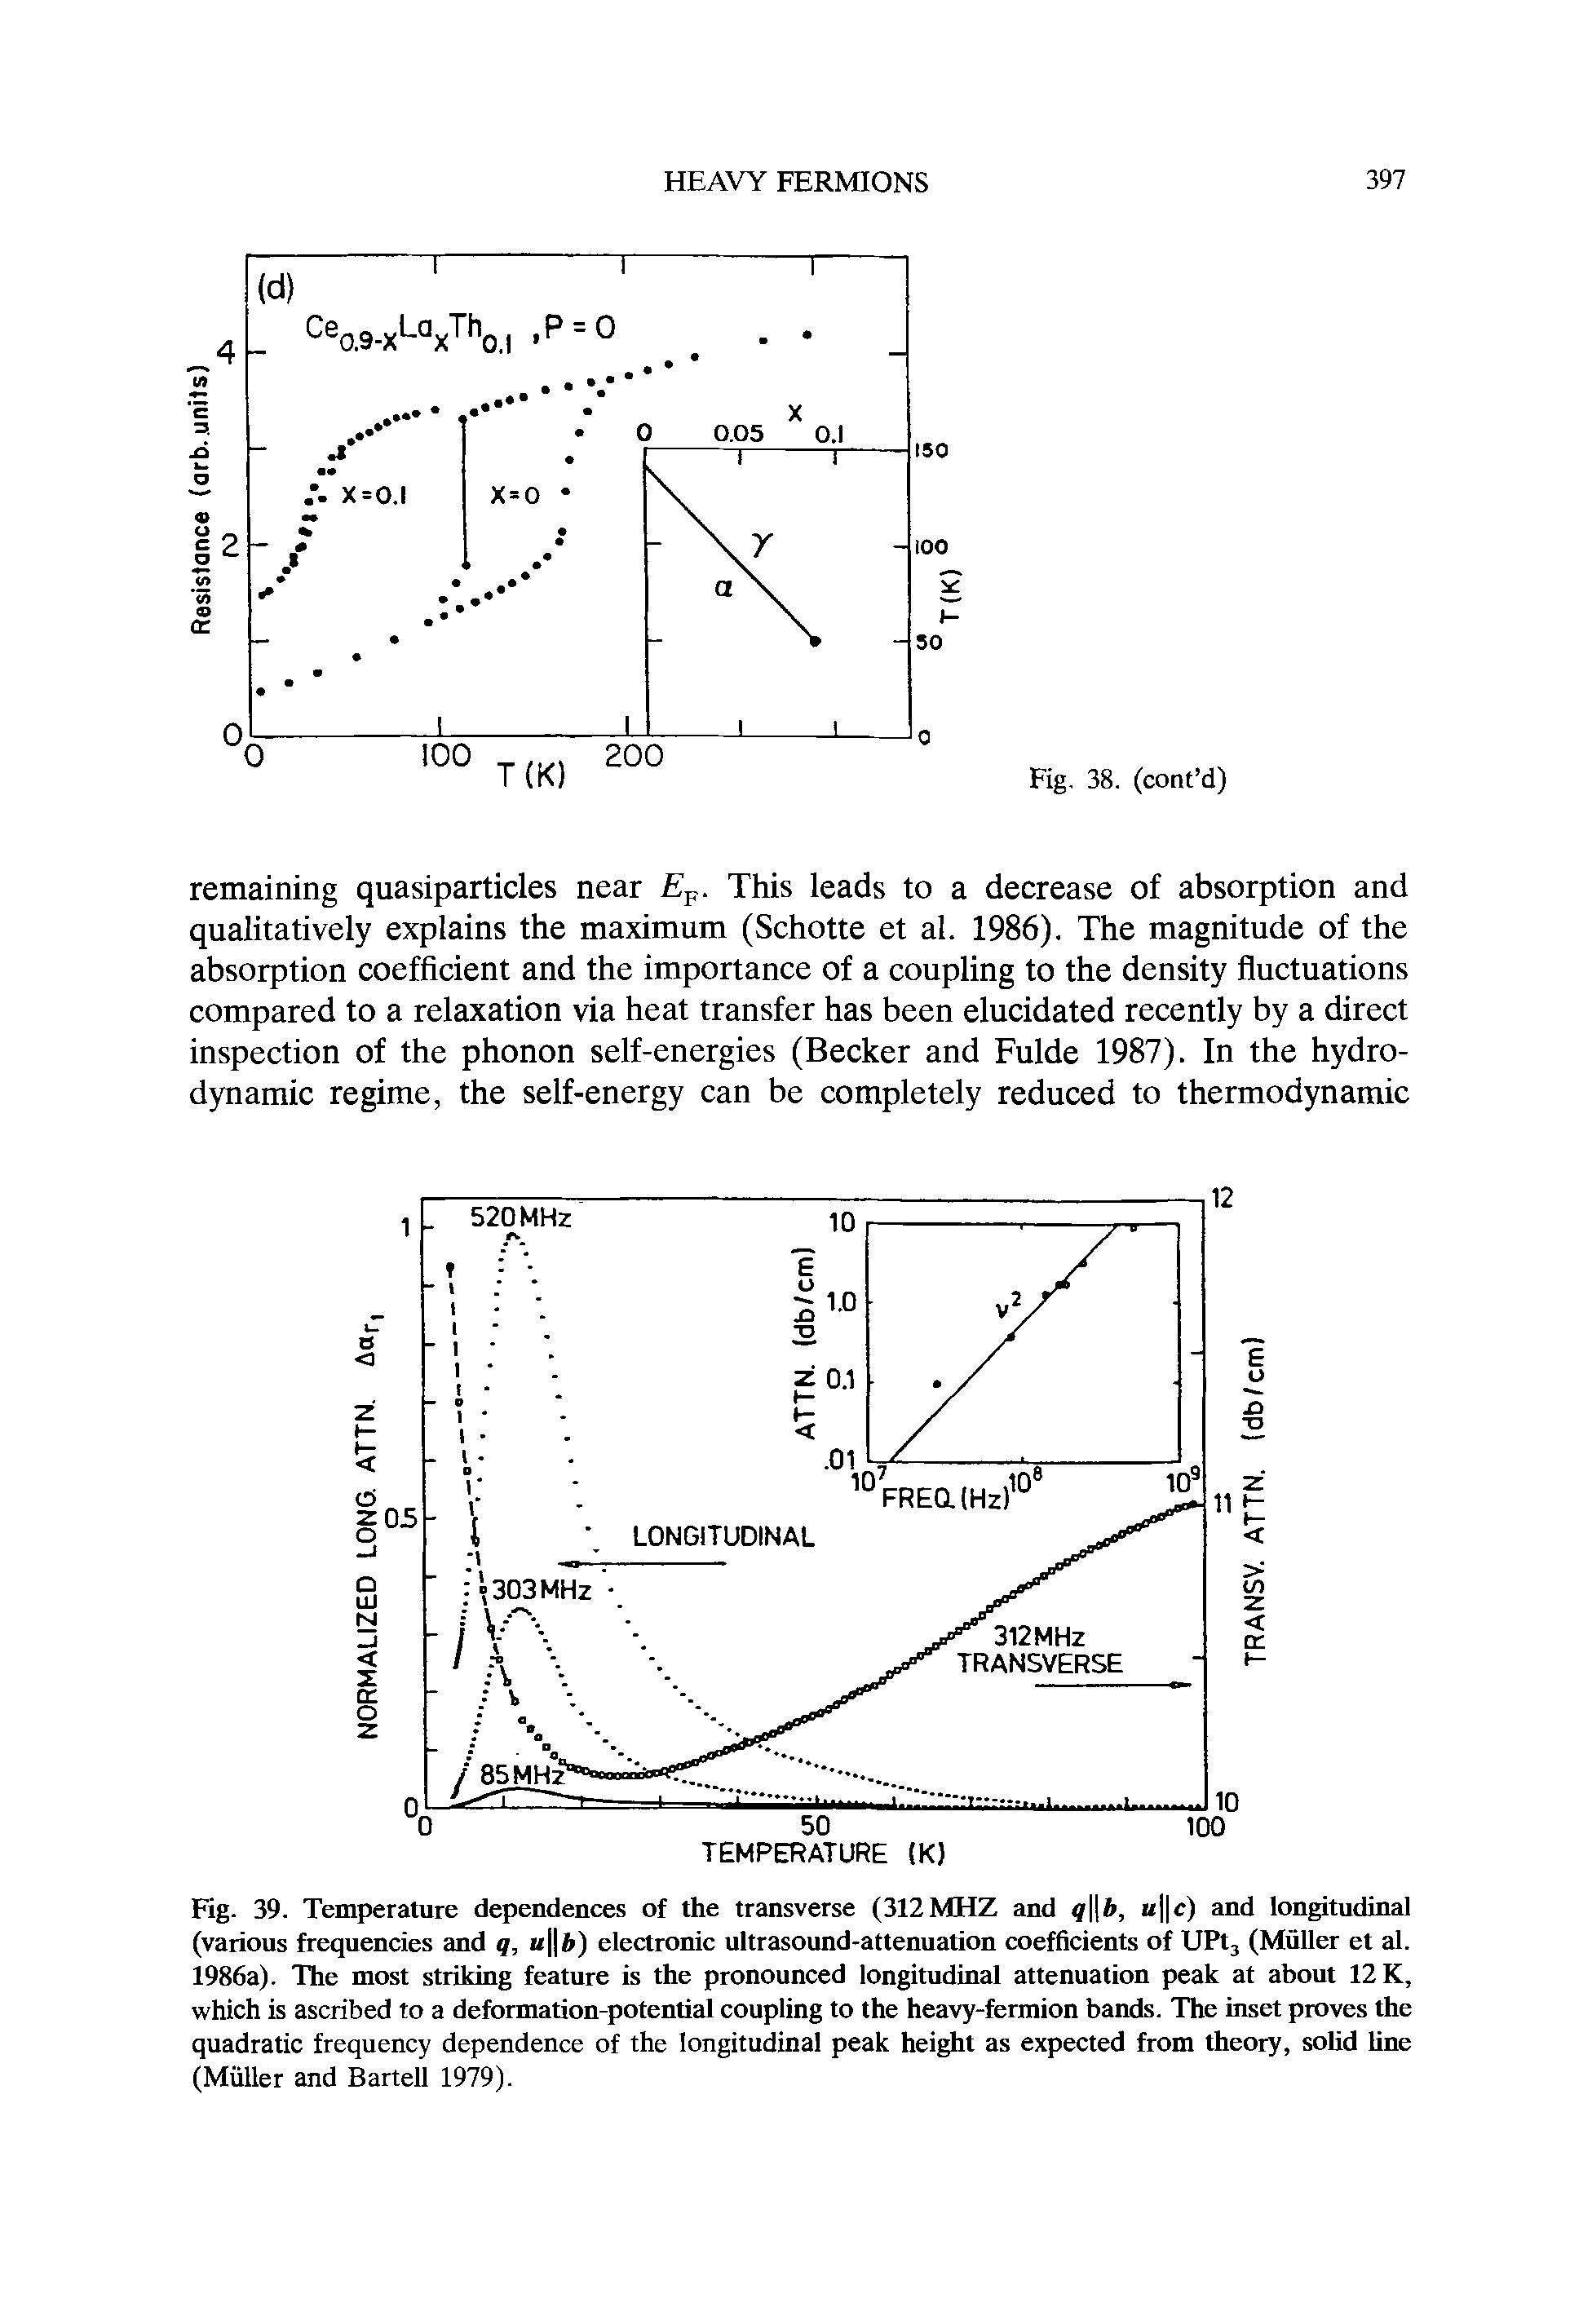 Fig. 39. Temperature dependences of the transverse (312MHZ and q h, u c) and longitudinal (various frequencies and q, u b) elearonic ultrasound-attenuation coefficients of UPt, (Muller et al. 1986a). The most striking feature is the pronounced longitudinal attenuation peak at about 12 K, which is ascribed to a deformation-potential coupling to the heavy-fermion bands. The inset proves the quadratic frequency dependence of the longitudinal peak height as expected from theory, solid line (Muller and Bartell 1979).